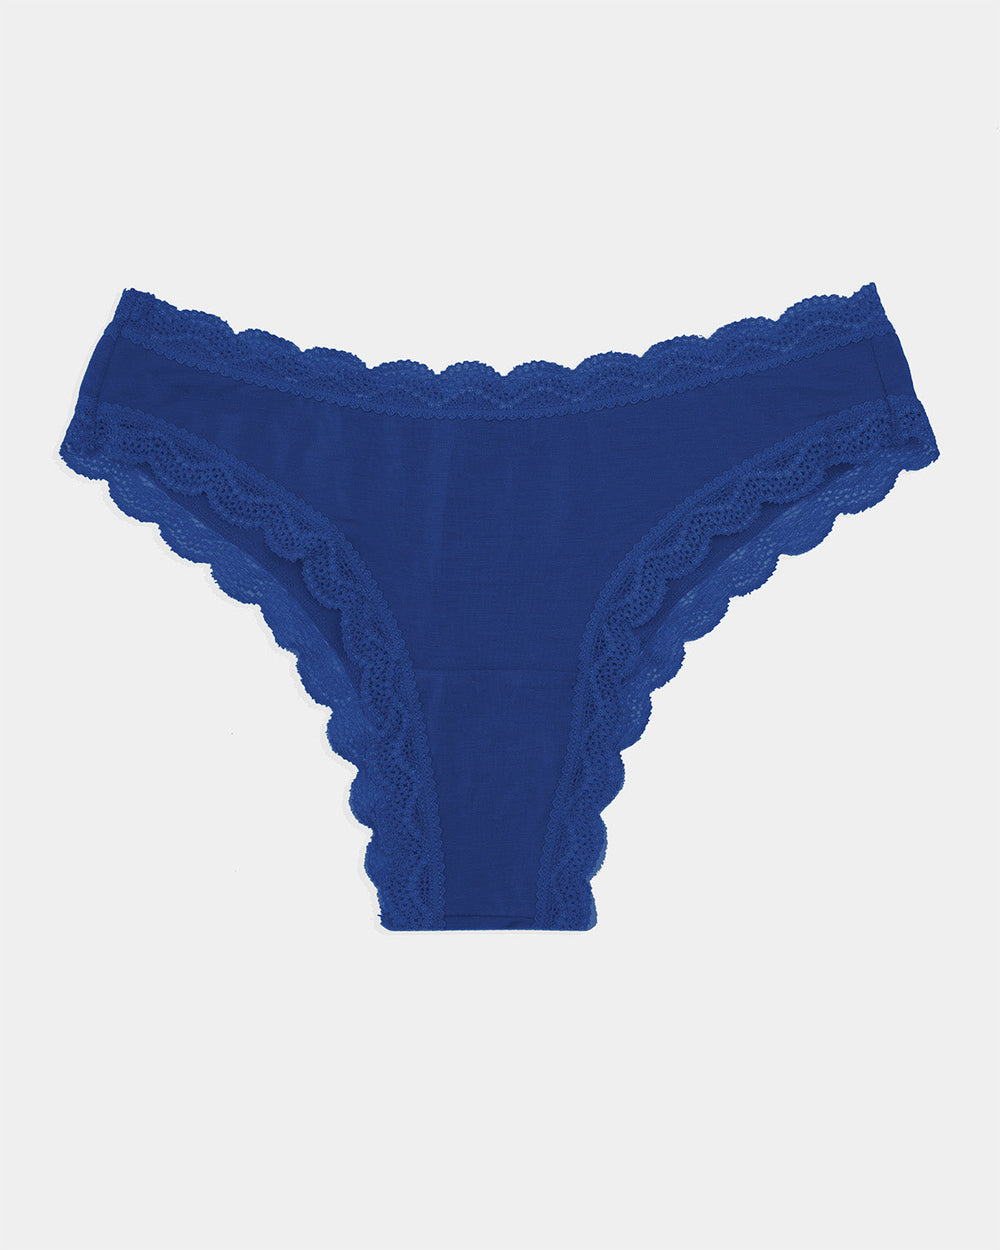 Brazilian Brief - French Navy  Sustainable TENCEL™ Lace Underwear